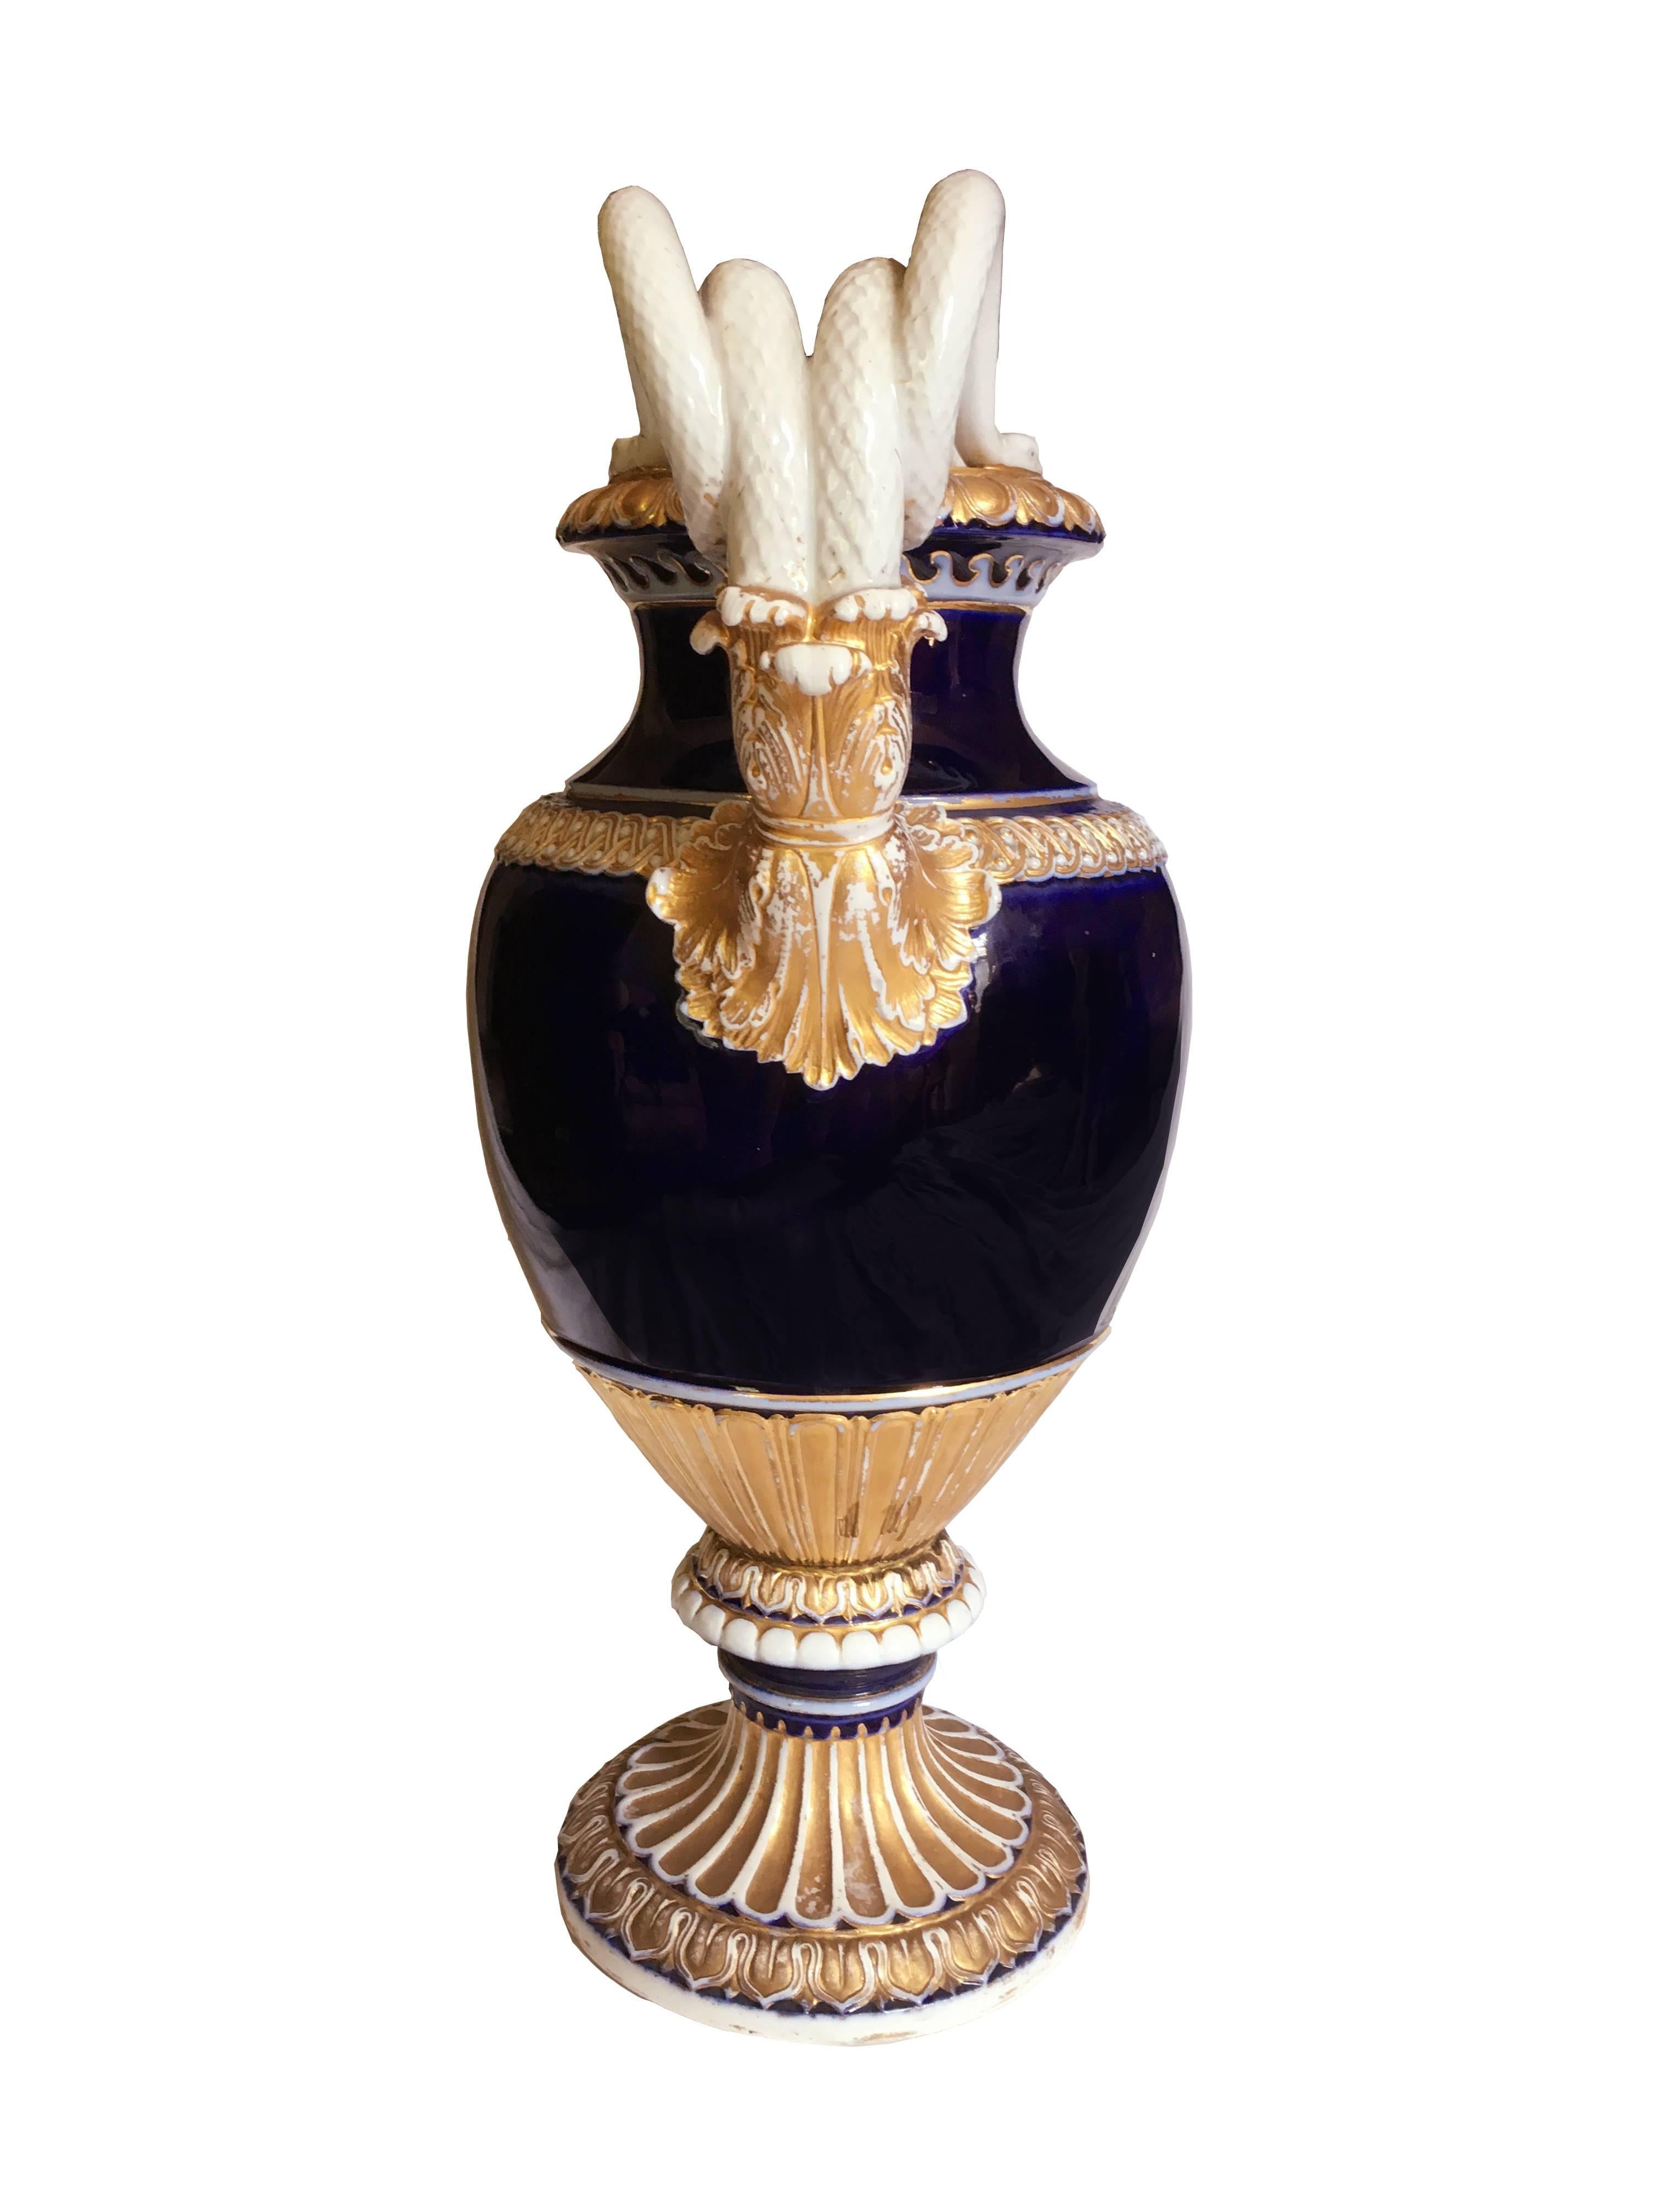 A Meissen Porcelain vase, this lovely piece features a deep blue body with scrolled snake handles with acanthus termini. The base is gadrooned and fluted with Fine classical detailing of lambs tongue and egg and dart, Germany, circa 1870.